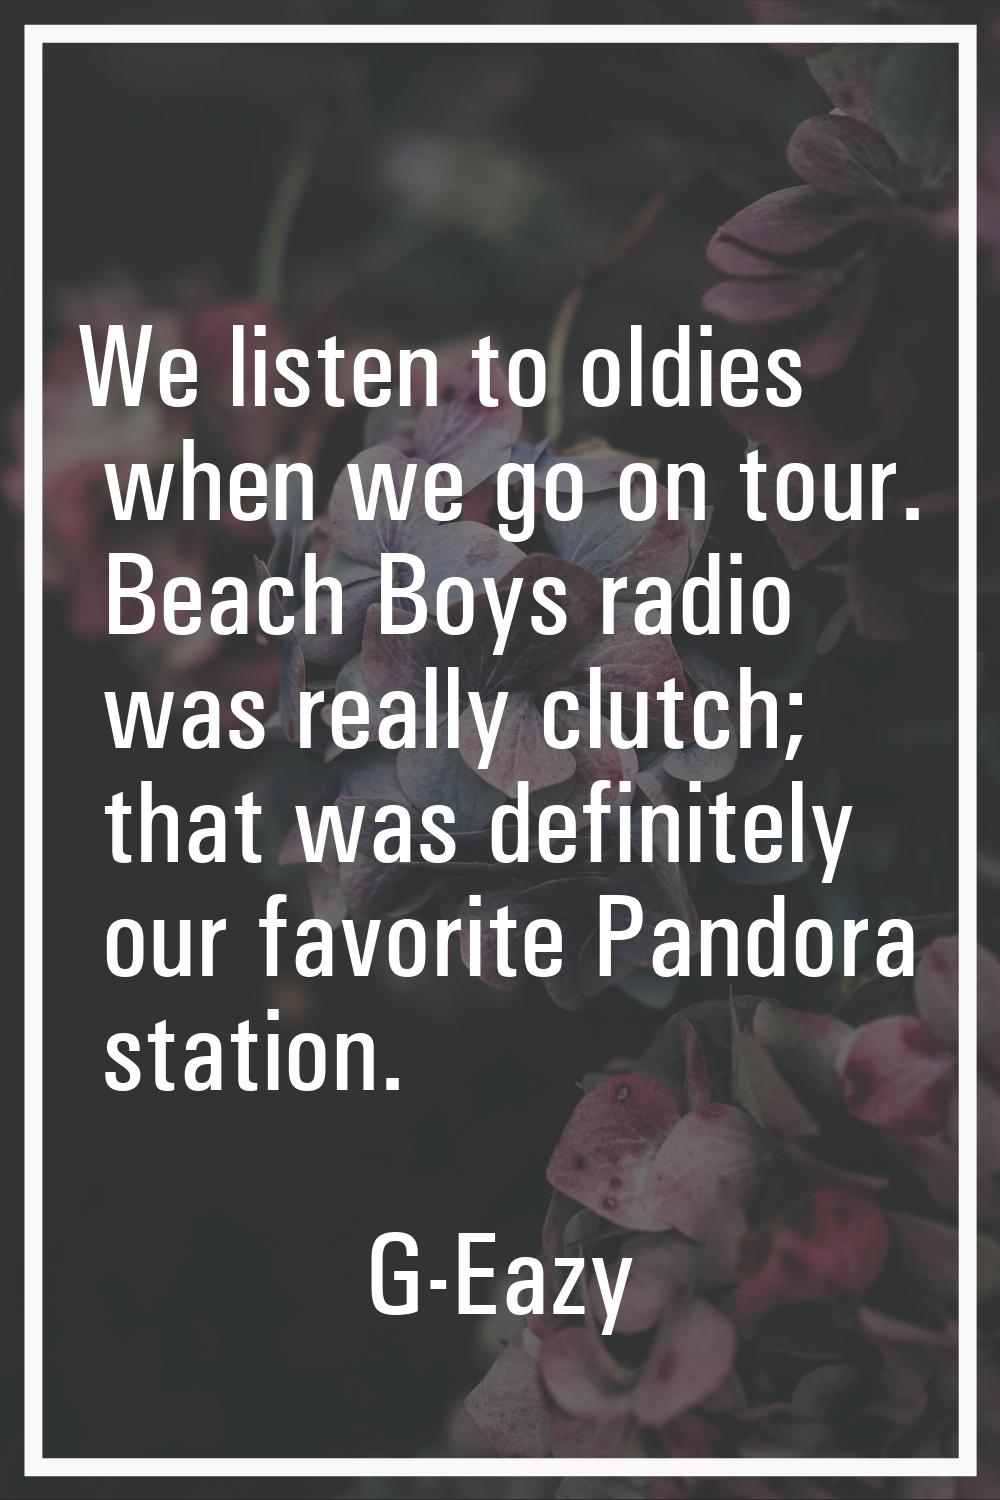 We listen to oldies when we go on tour. Beach Boys radio was really clutch; that was definitely our